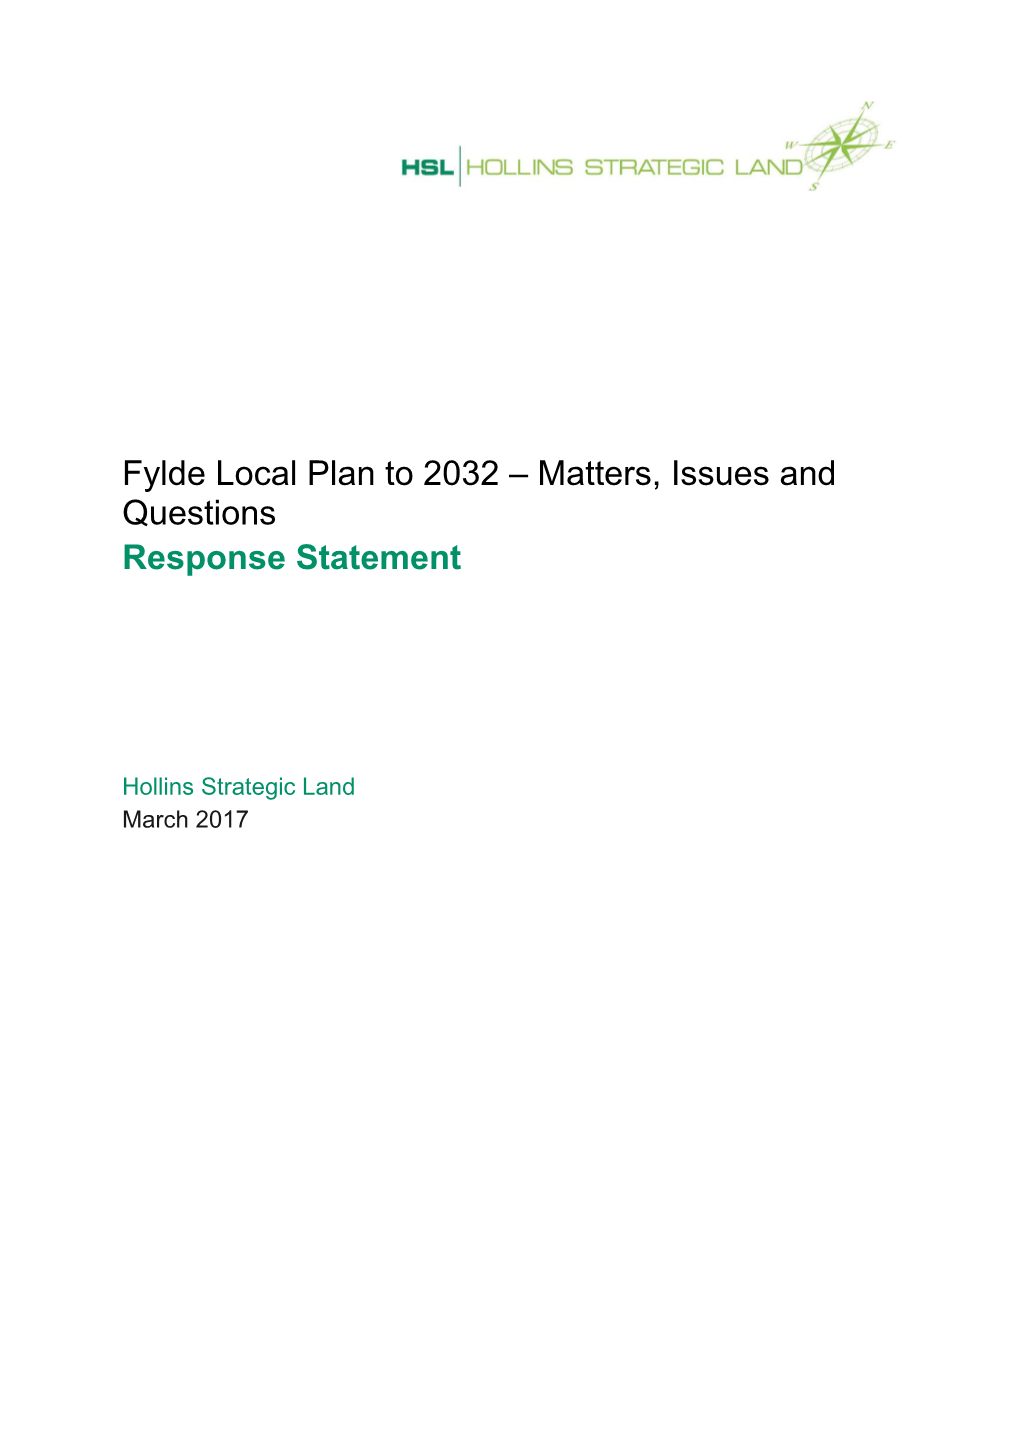 Fylde Local Plan to 2032 – Matters, Issues and Questions Response Statement